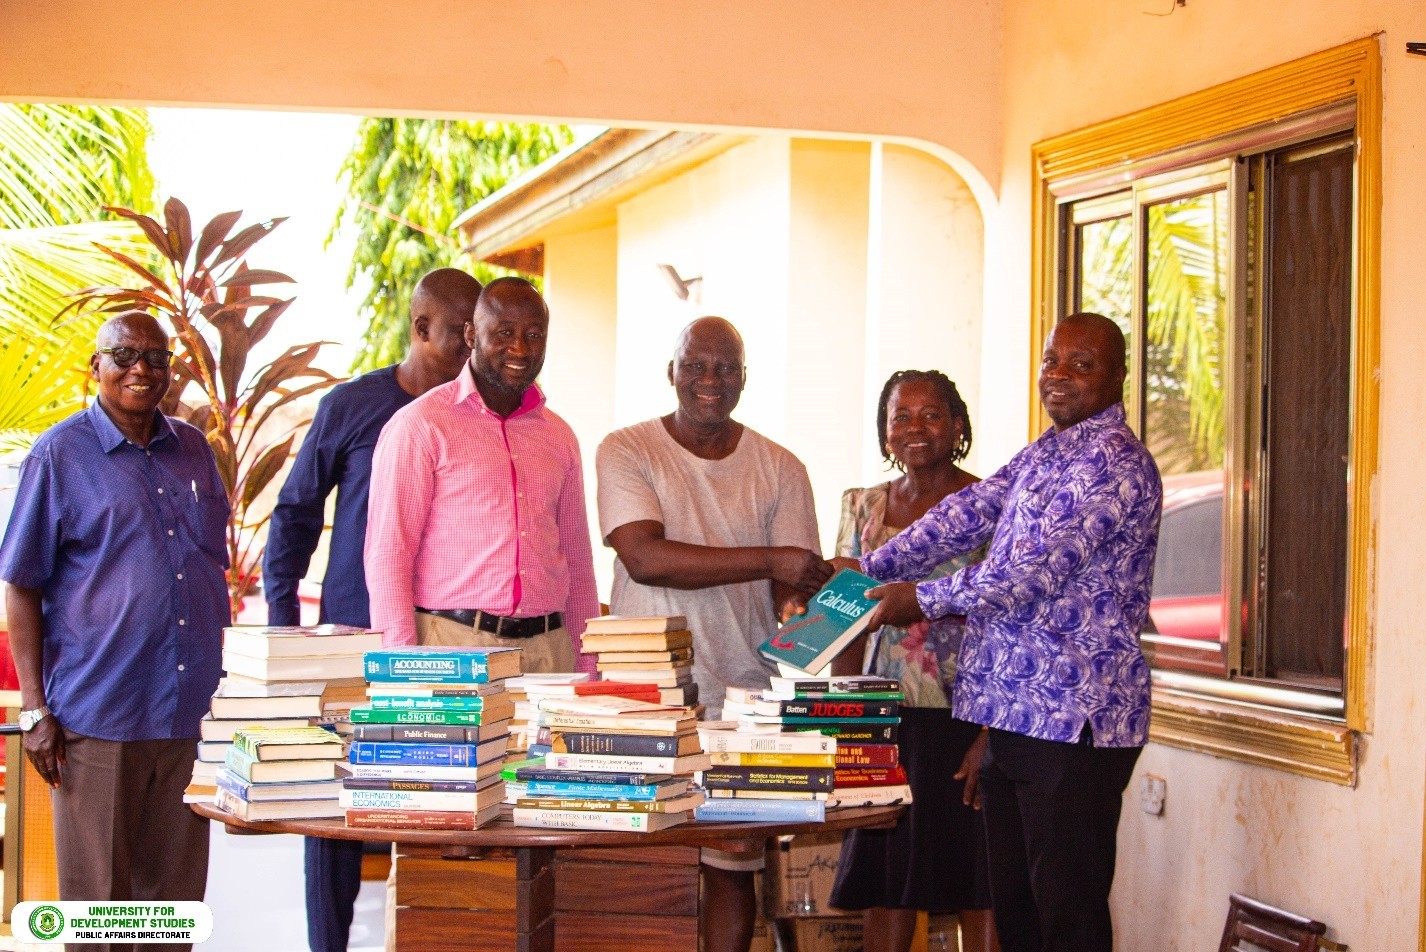 Former MP and Retired Lecturer, Mr. Ibrahim Alabira Donates Collection of Books to the University for Development Studies Library